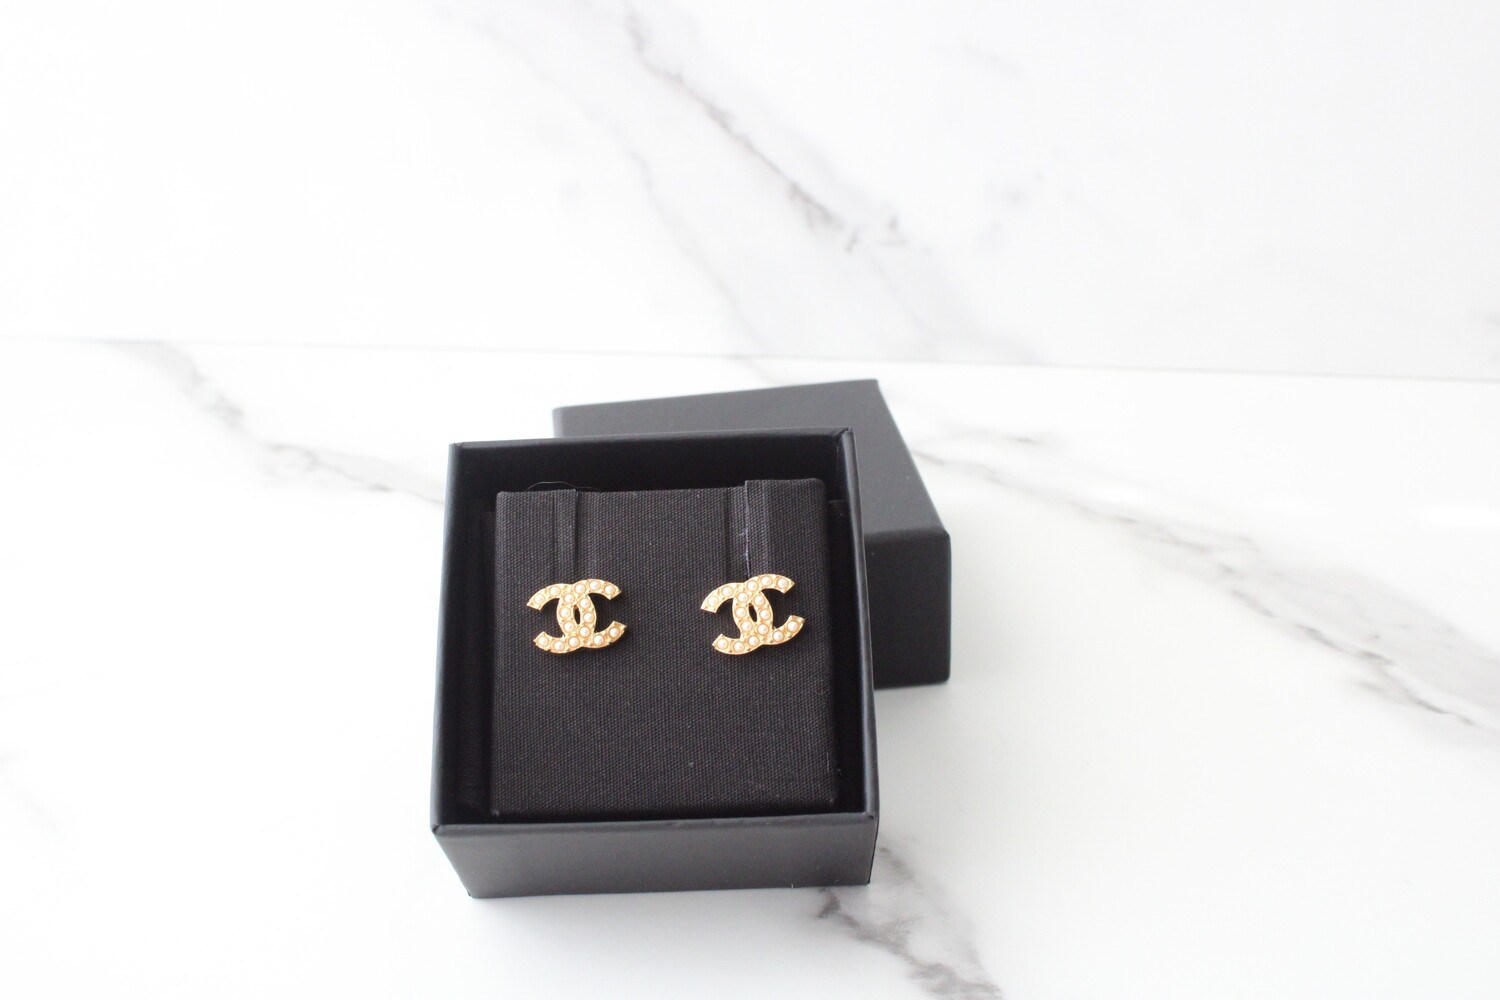 Chanel Earrings Studs, 22A Pearls, Gold Hardware, New in Box